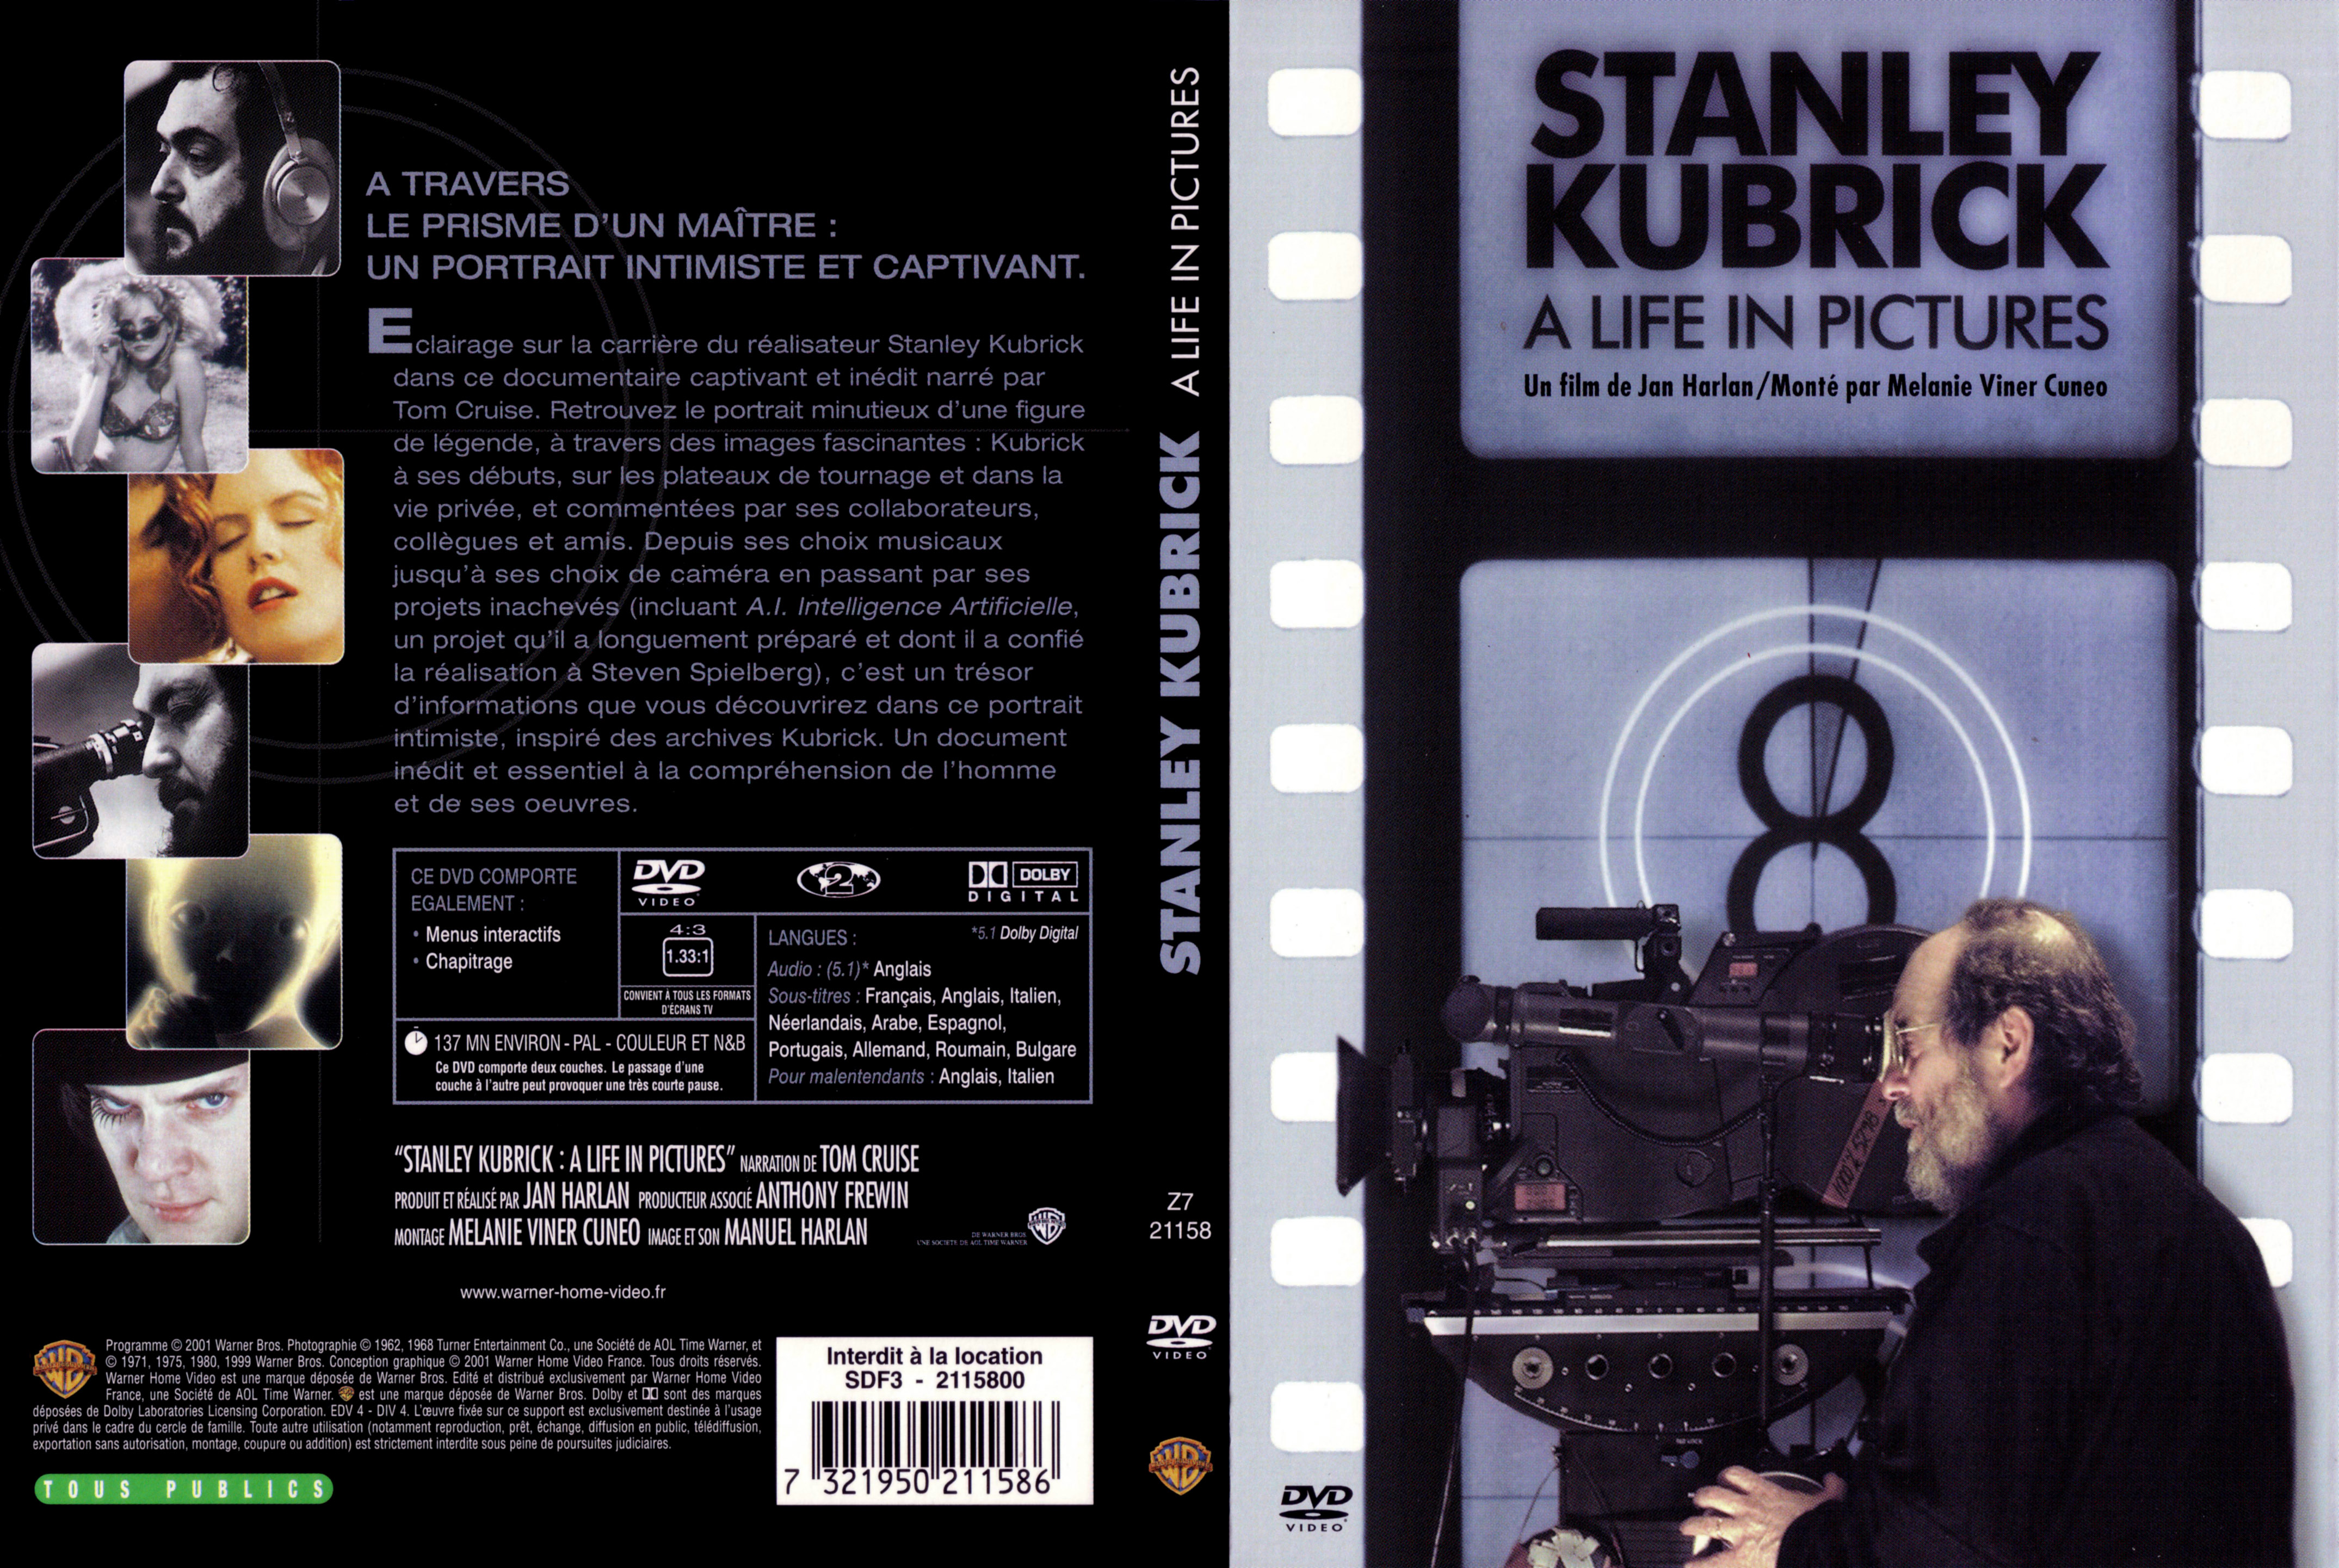 Jaquette DVD Stanley Kubrick A life in pictures